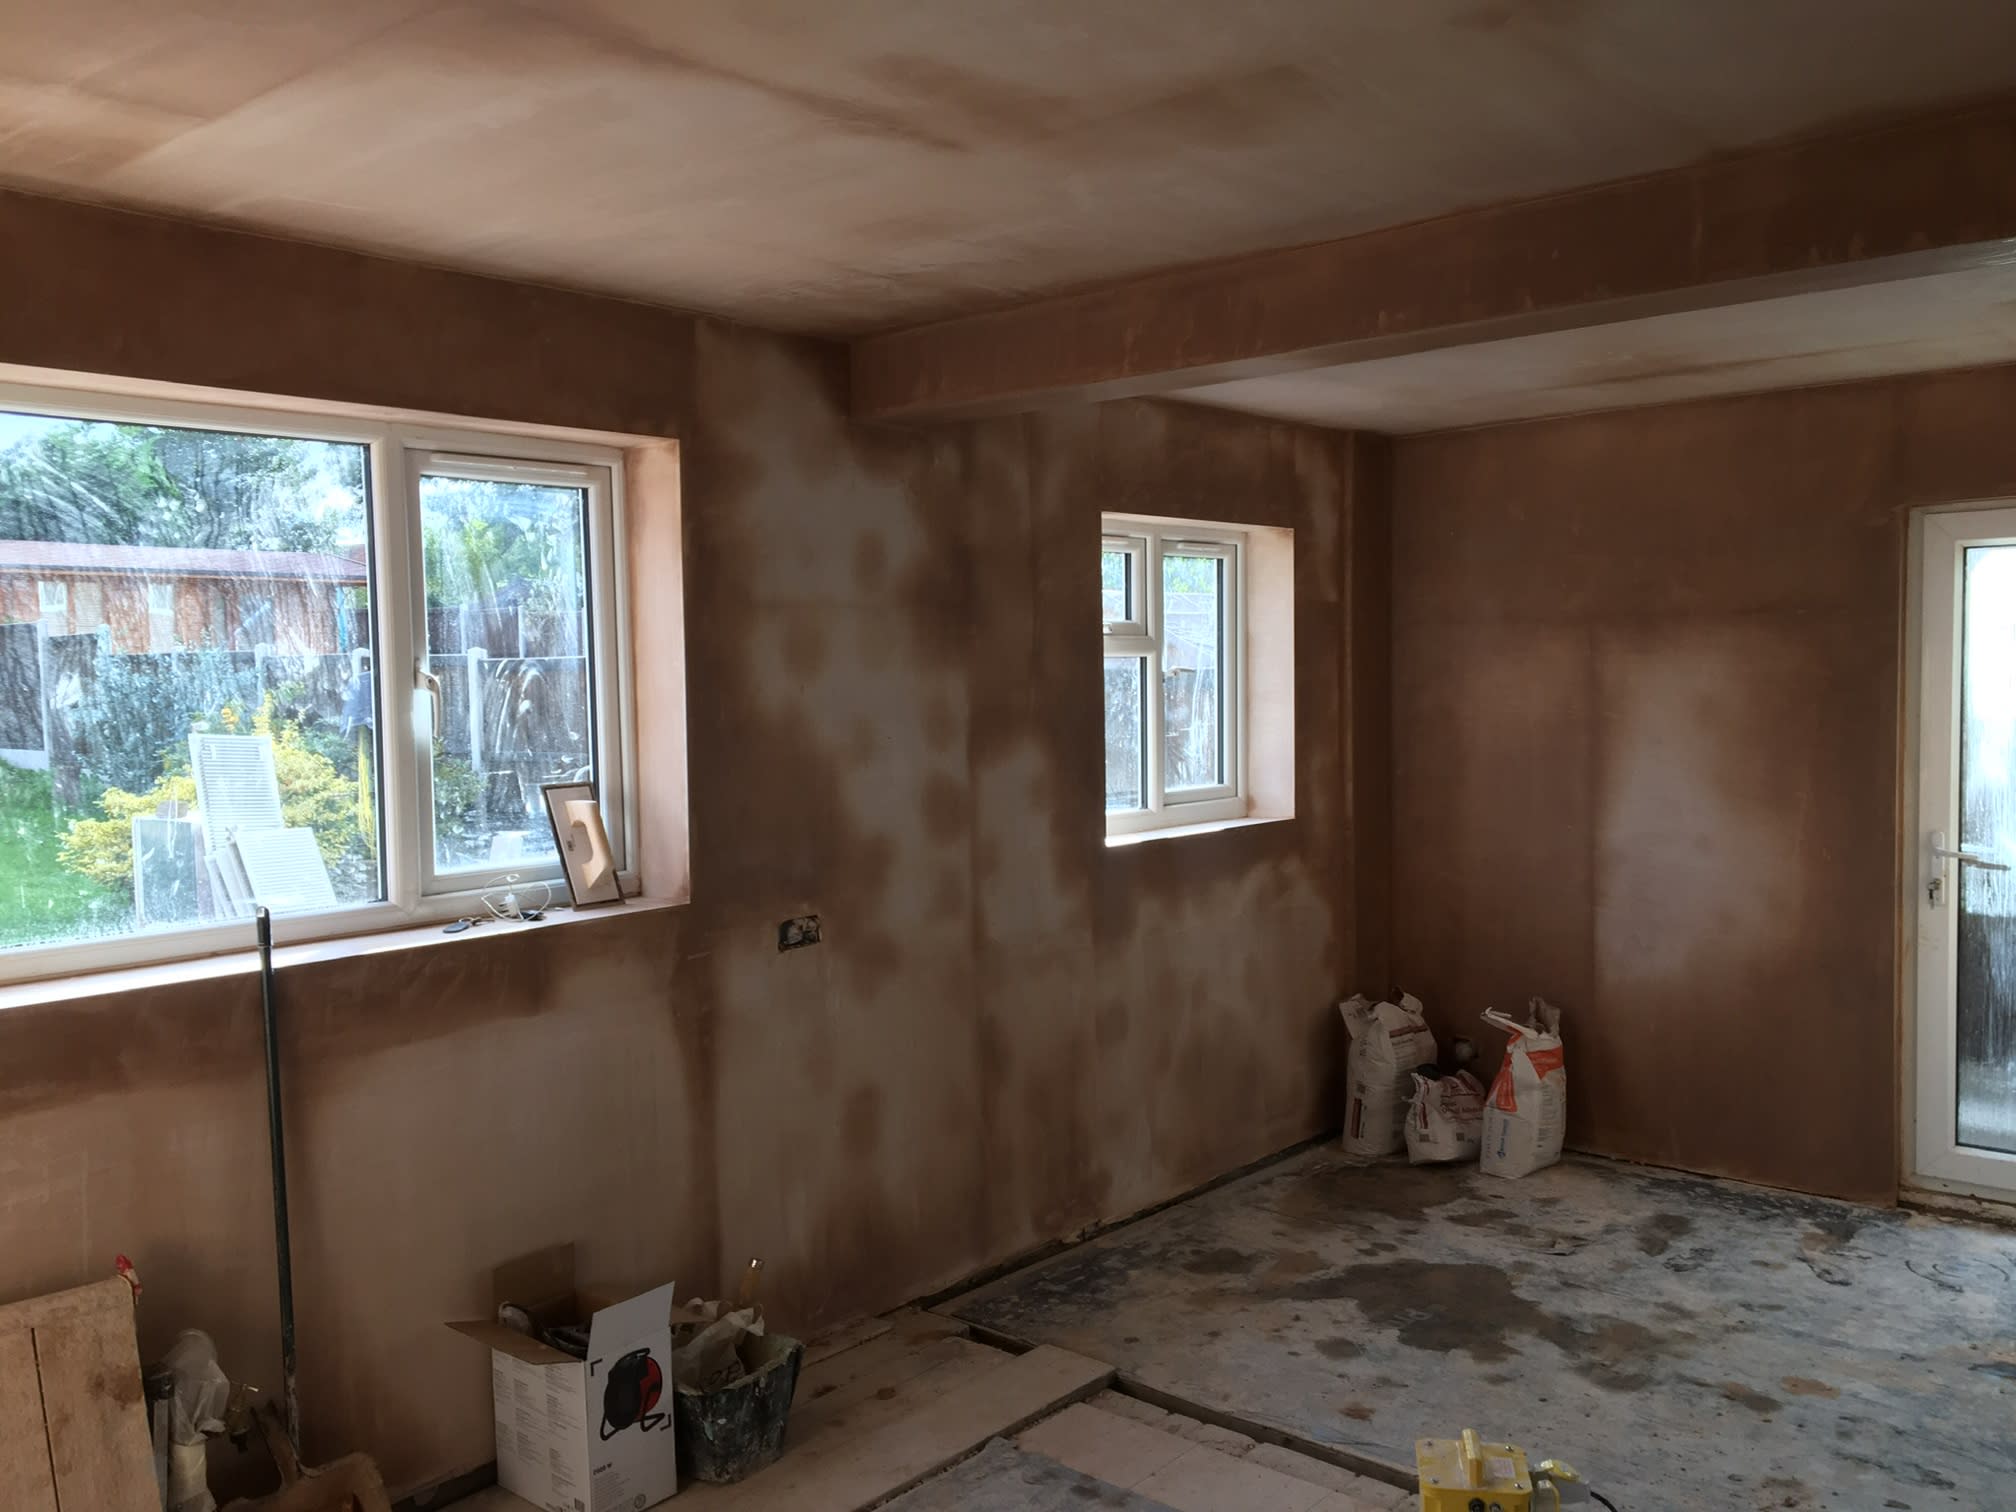 Images Essential Plastering Services